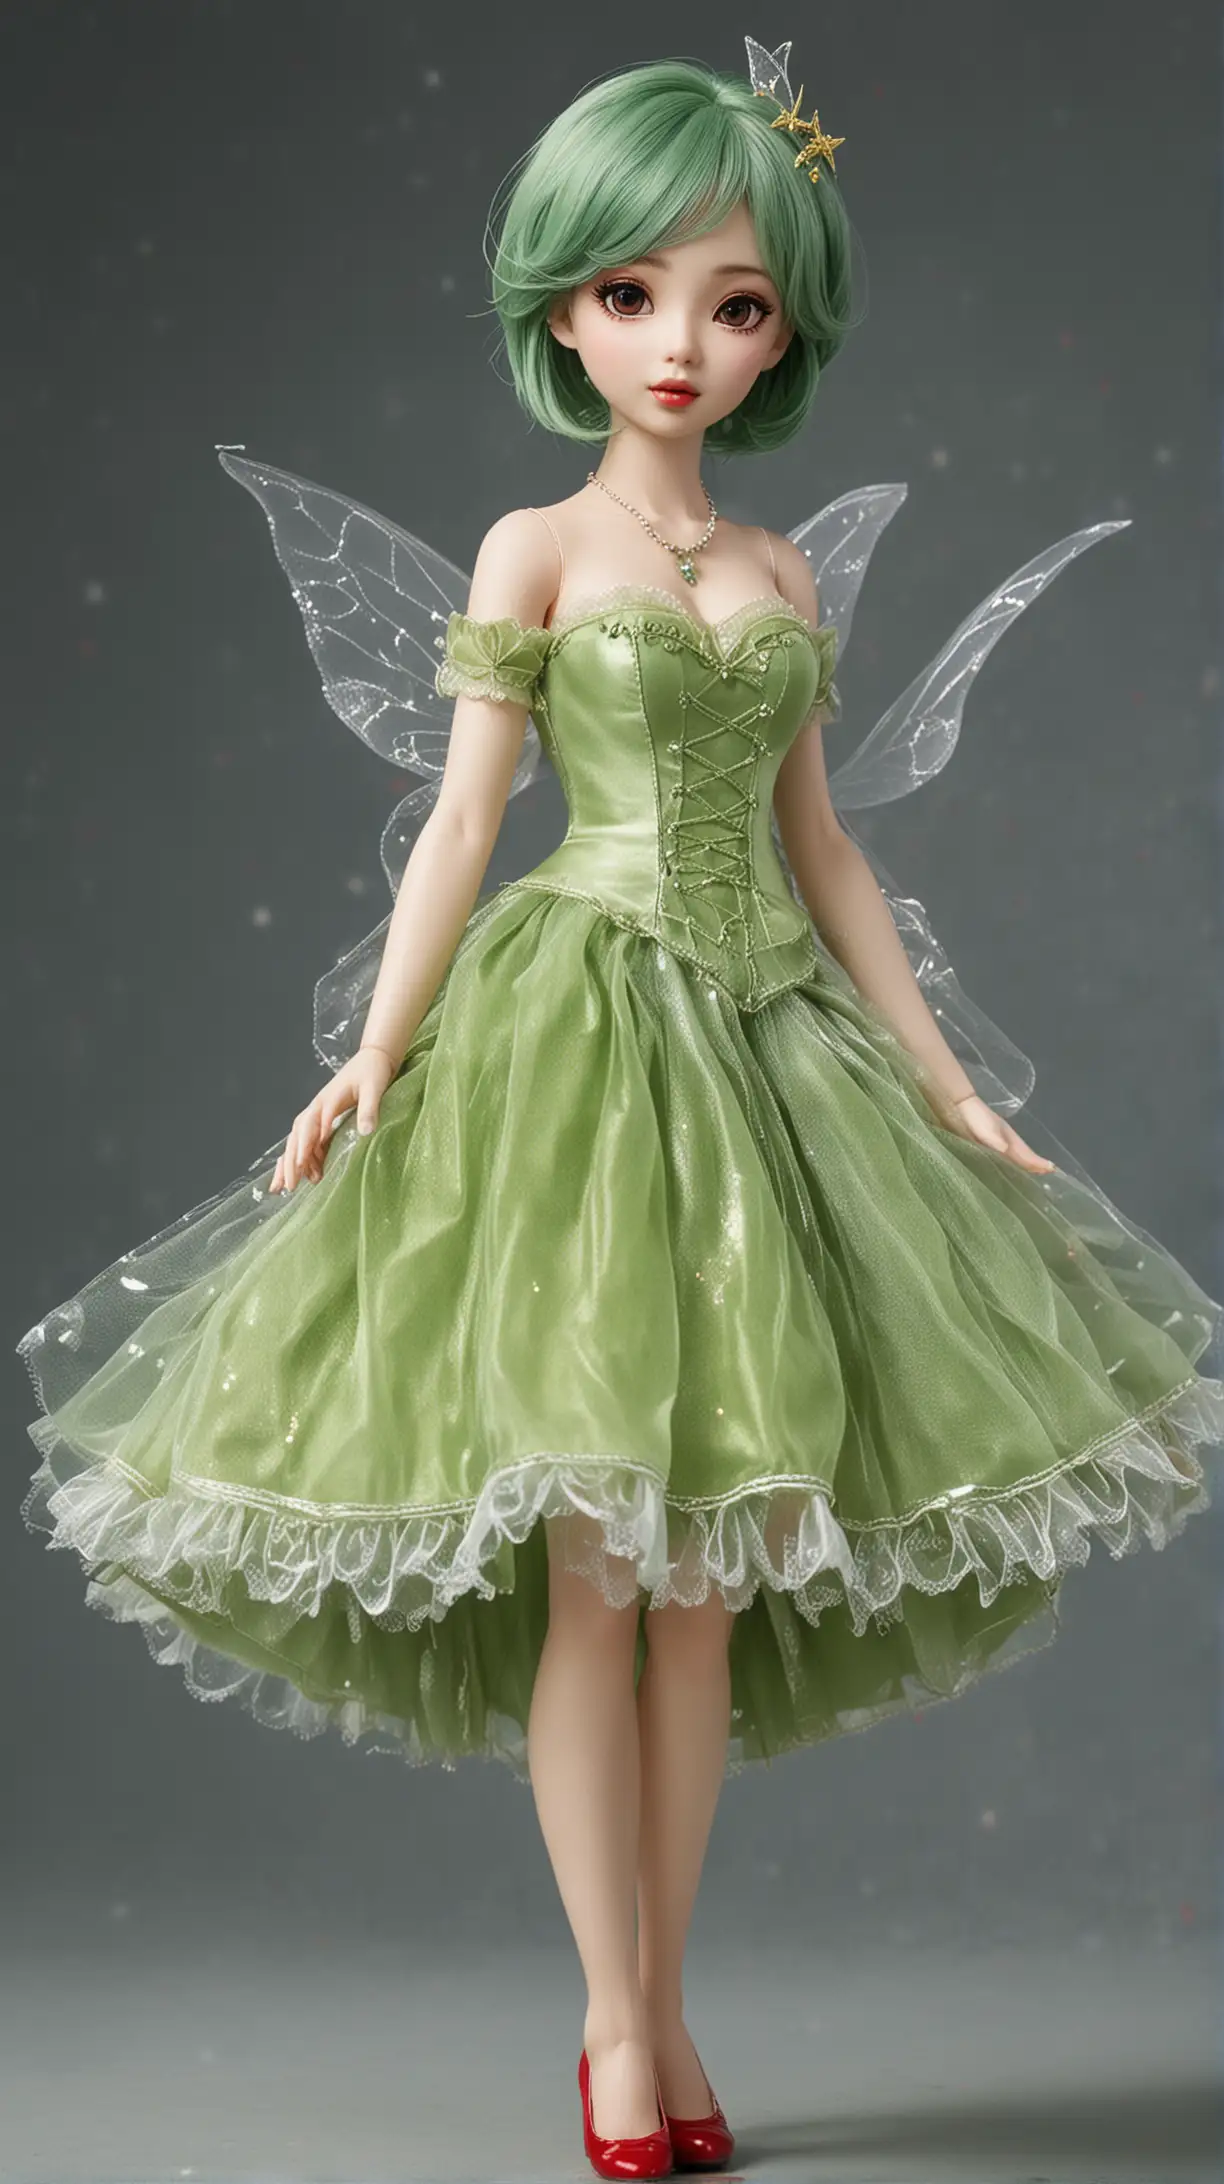 Kim Hye-yoon Beautiful Doll. green hair. wearing a Tinkerbell costume. Red Shoes.